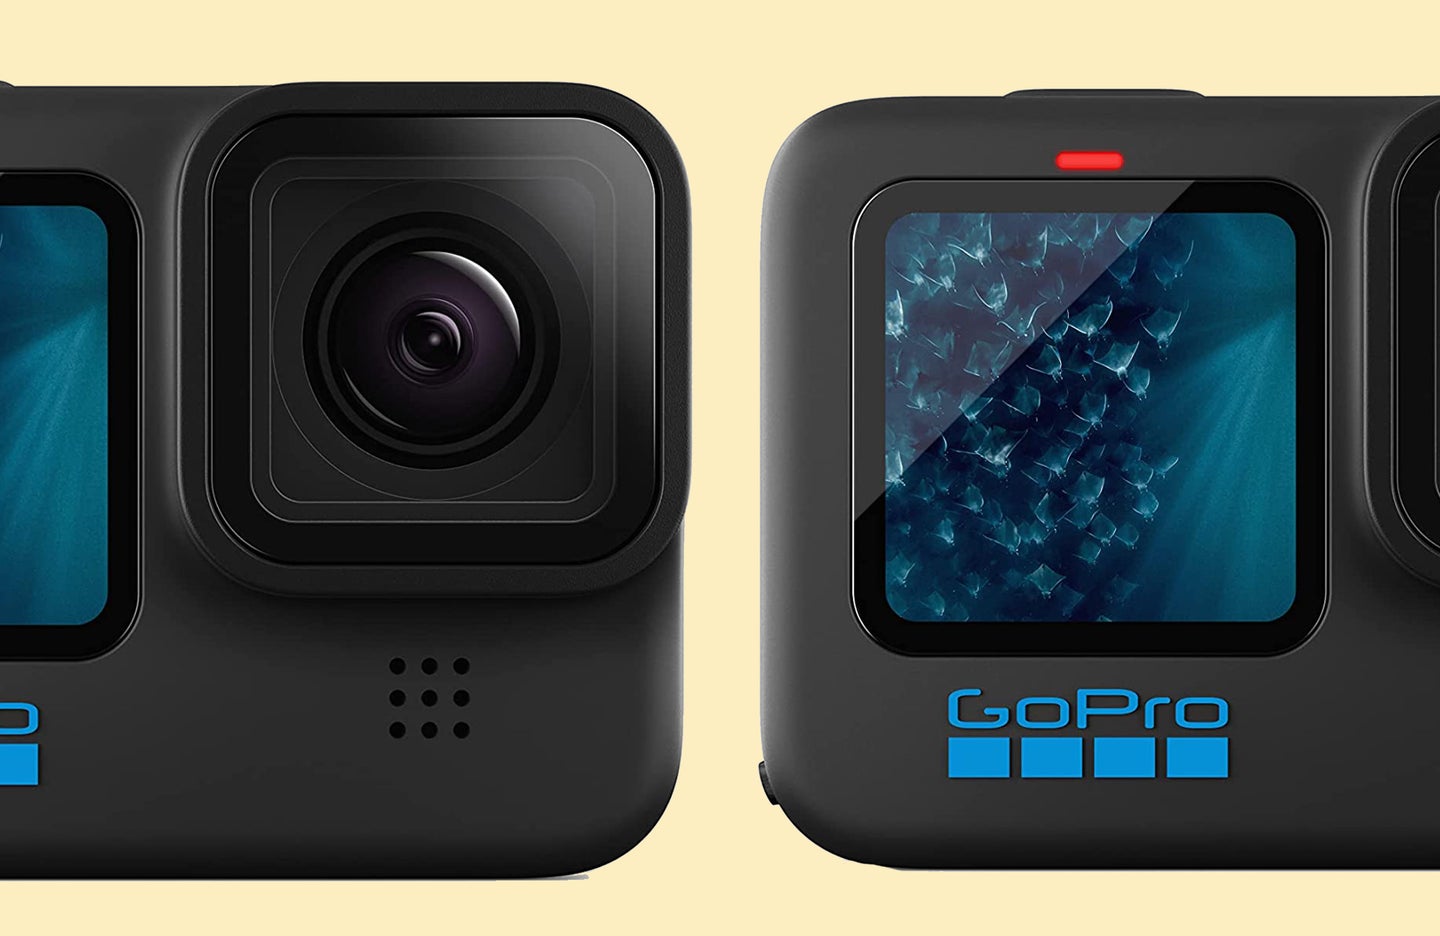 Black Friday GoPro Hero 11 Black deal: Save $100 on the best action cam around